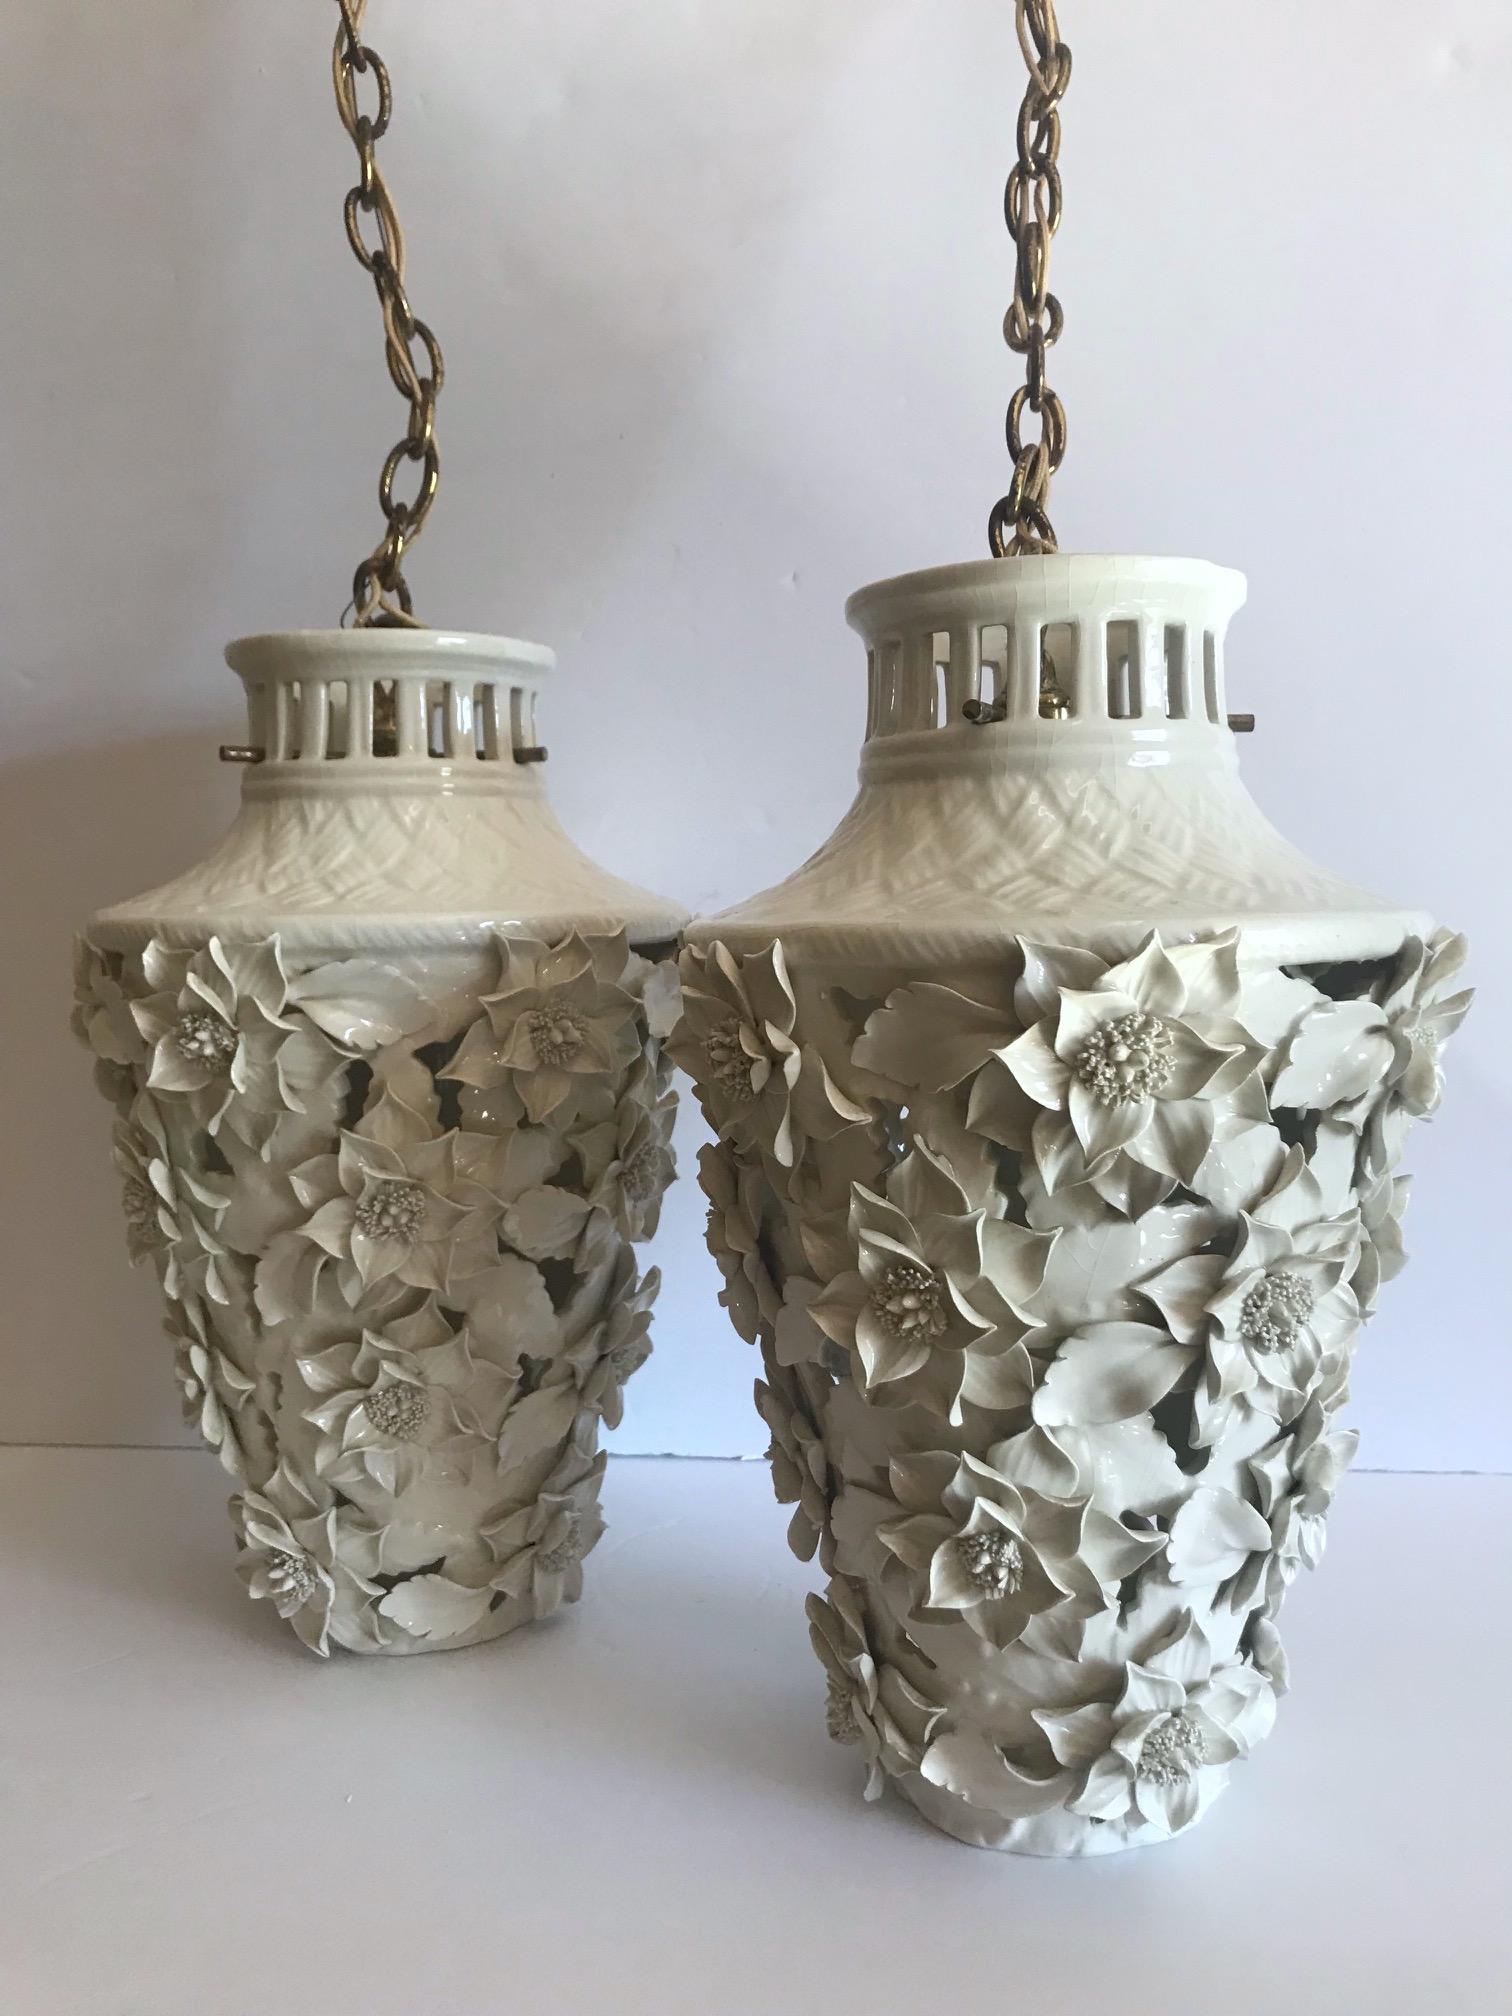 Pair of stunning Italian Blanc de Chine porcelain pendant chandeliers with exquisite floral details. The pendants have pagoda forms with etched bamboo design along the top with intricate handcrafted leaf and flowers throughout. Fitted with one light